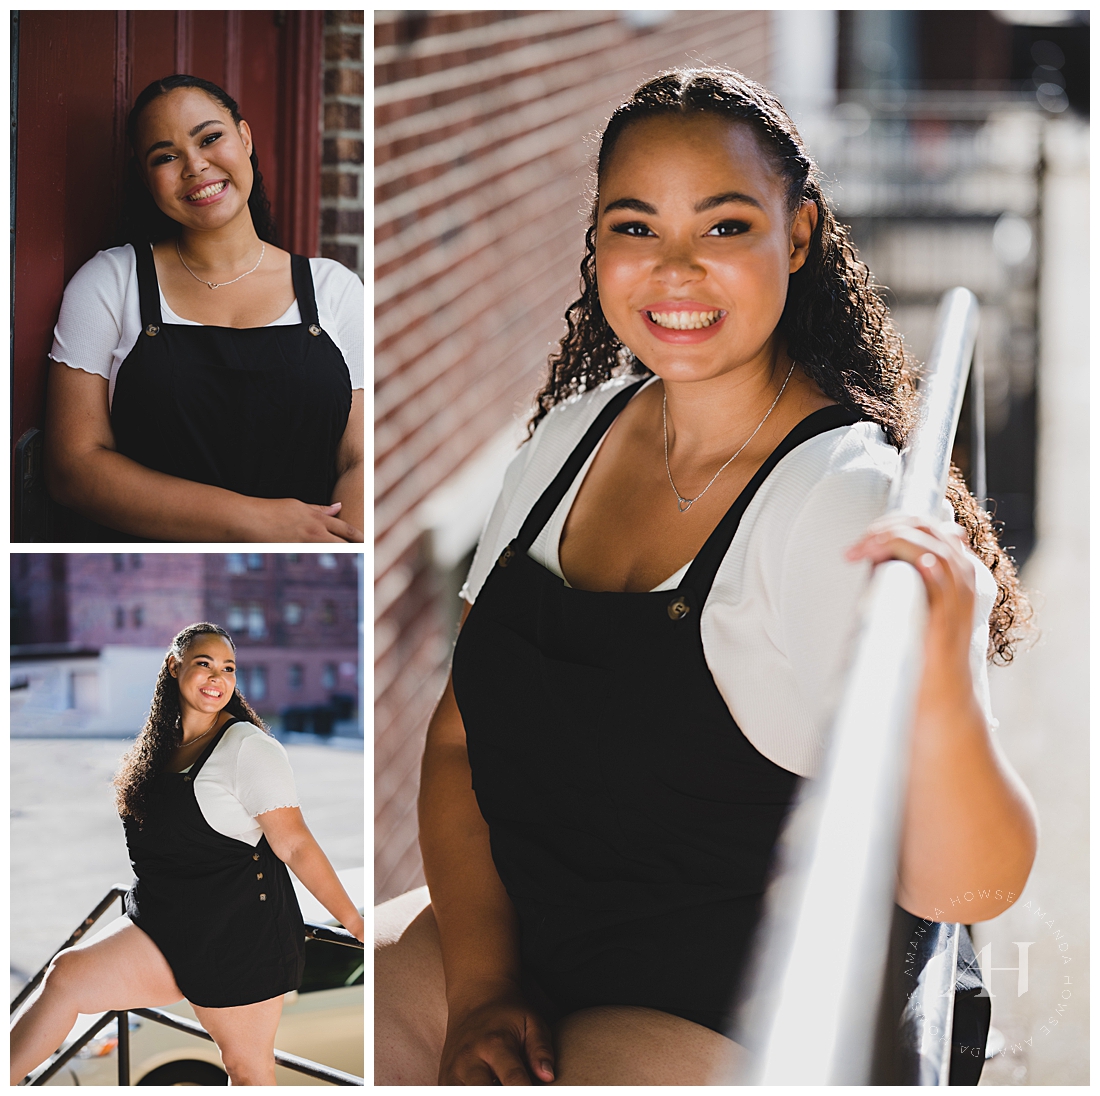 Poses Using Handrails in the City | B&W Senior Session Outfits, Black Romper with Cute White Top | Photographed by the Best Tacoma Senior Photographer Amanda Howse Photography